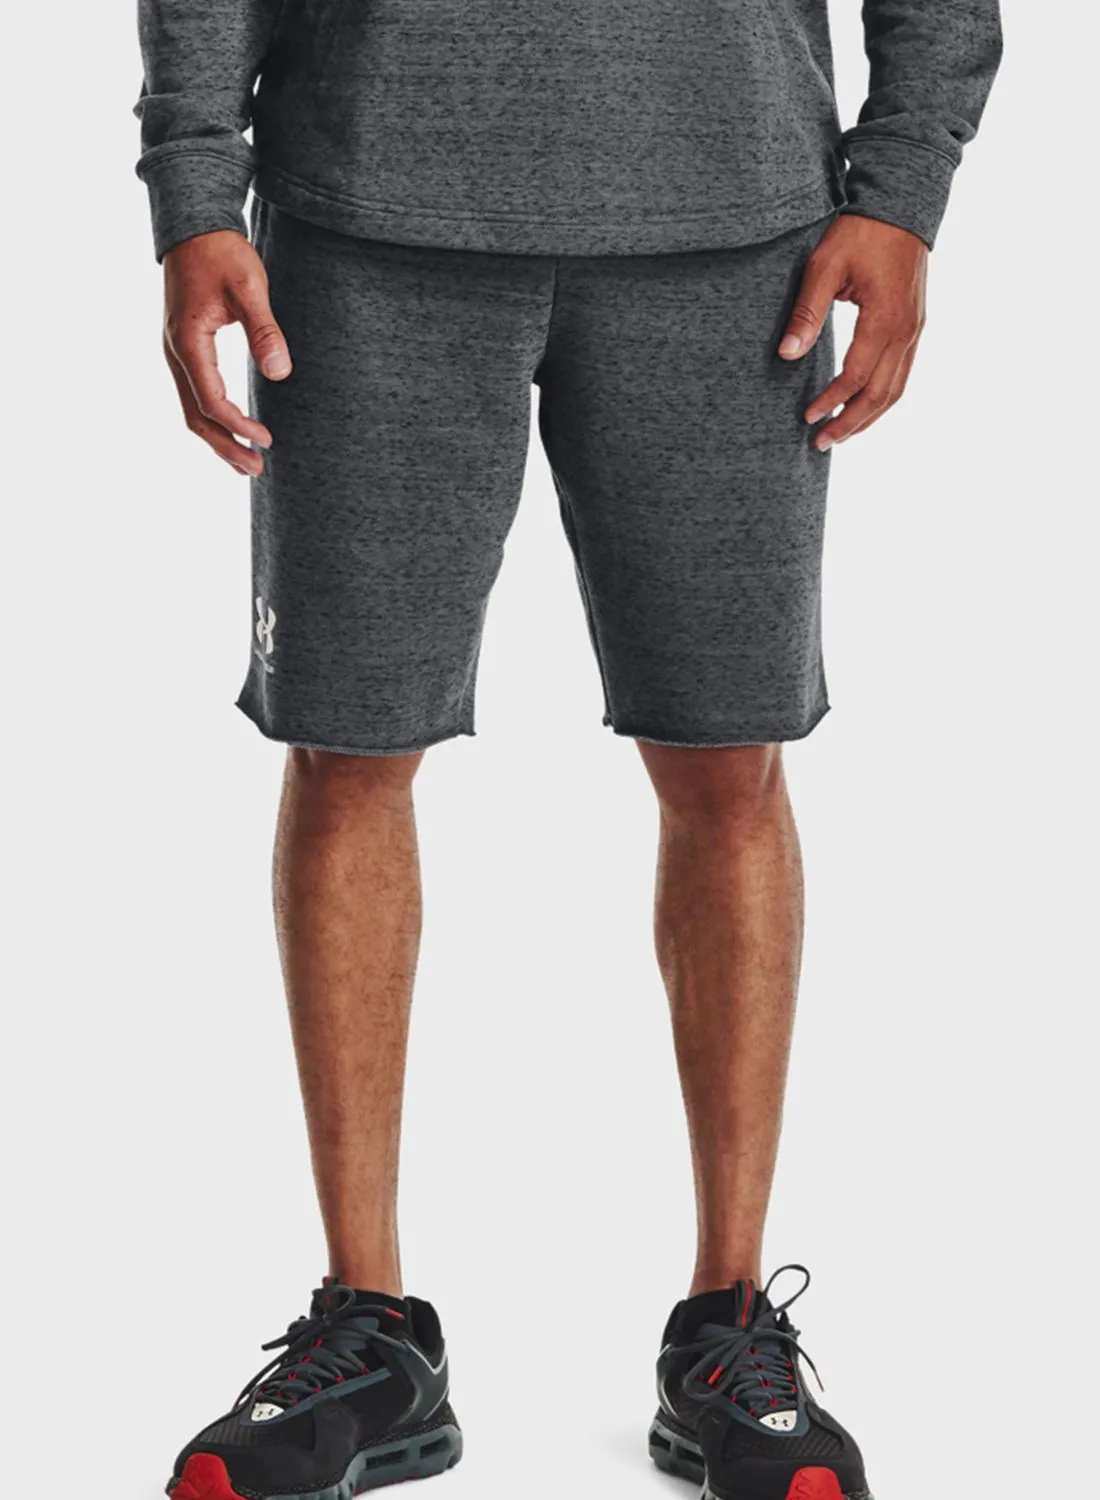 UNDER ARMOUR Rival Shorts